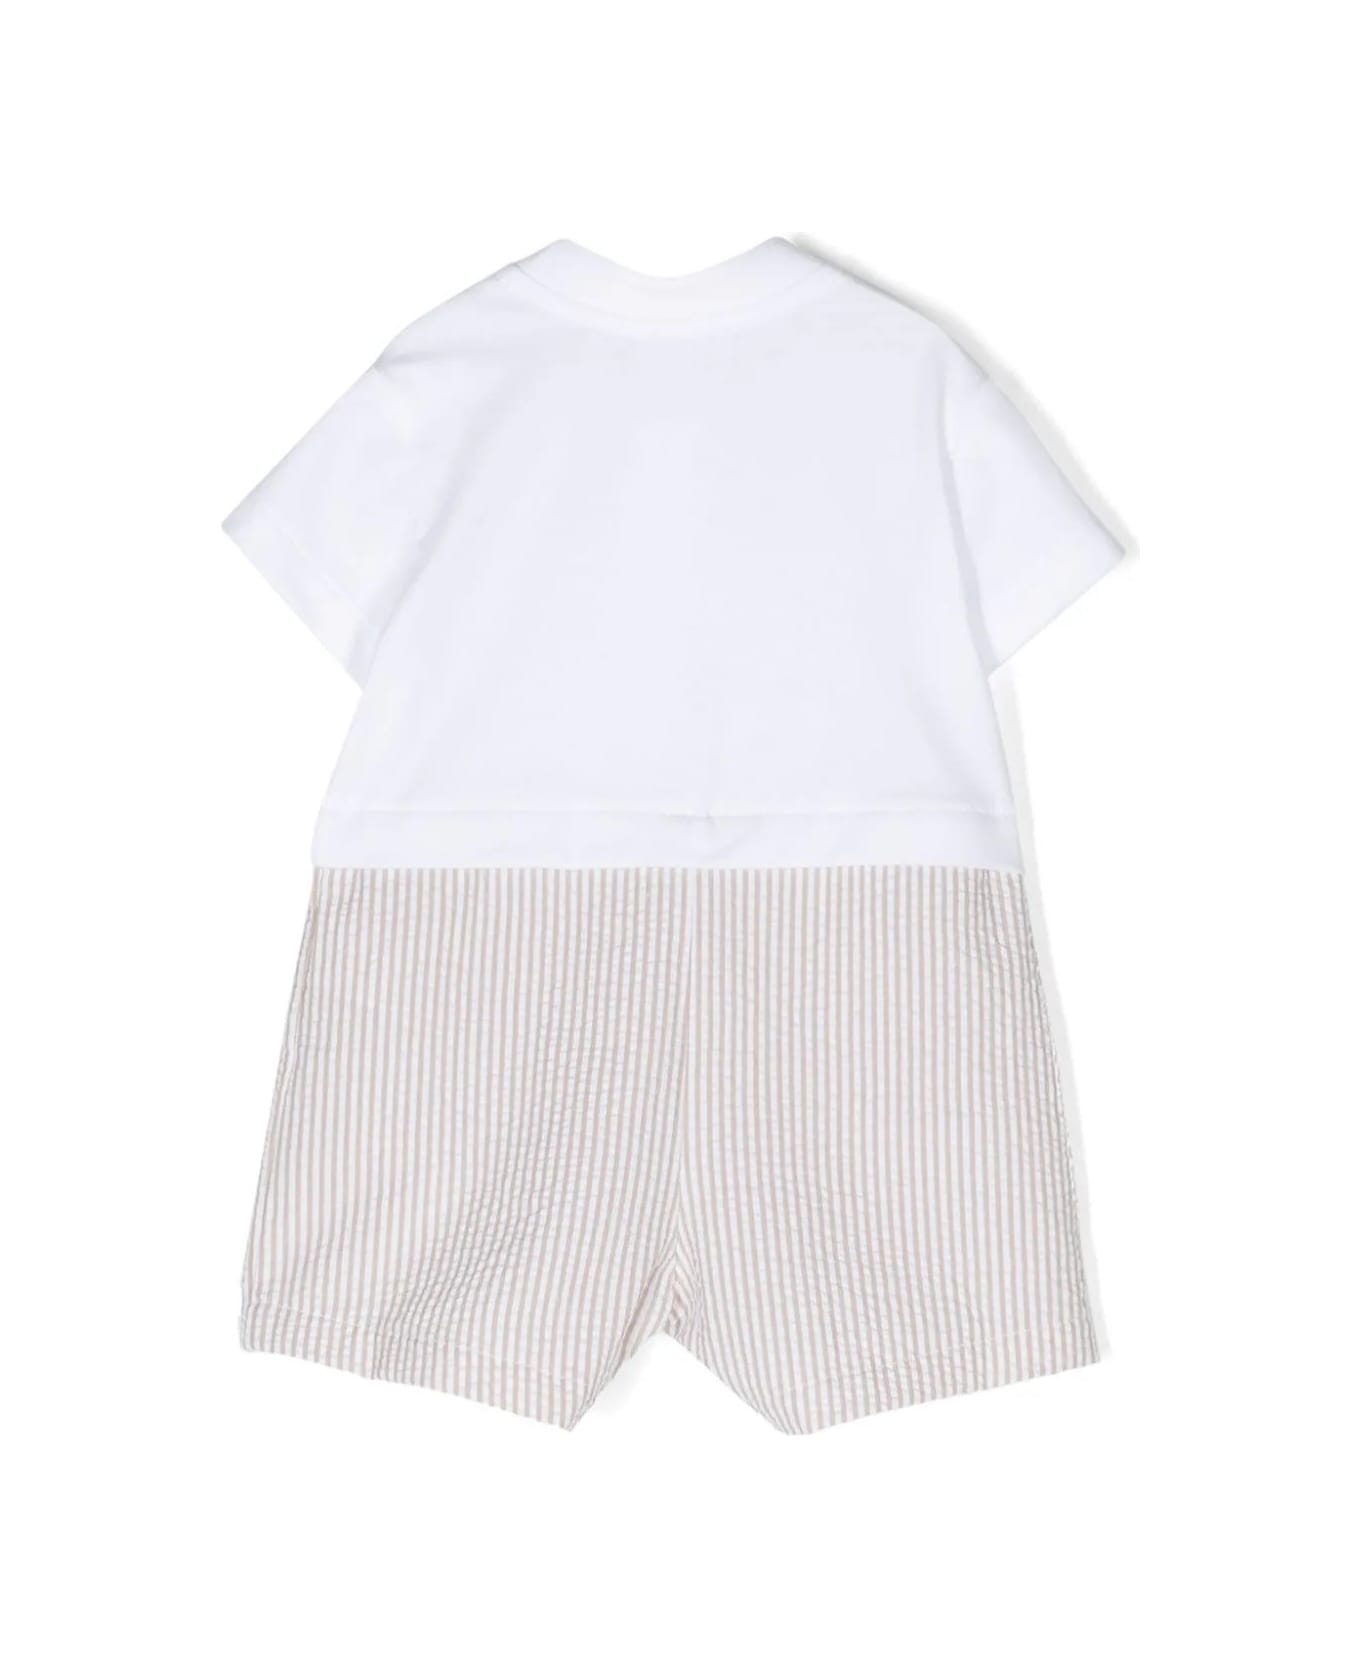 Il Gufo Beige And White Striped Seersucker Short Playsuit In Two Different Materials - Brown